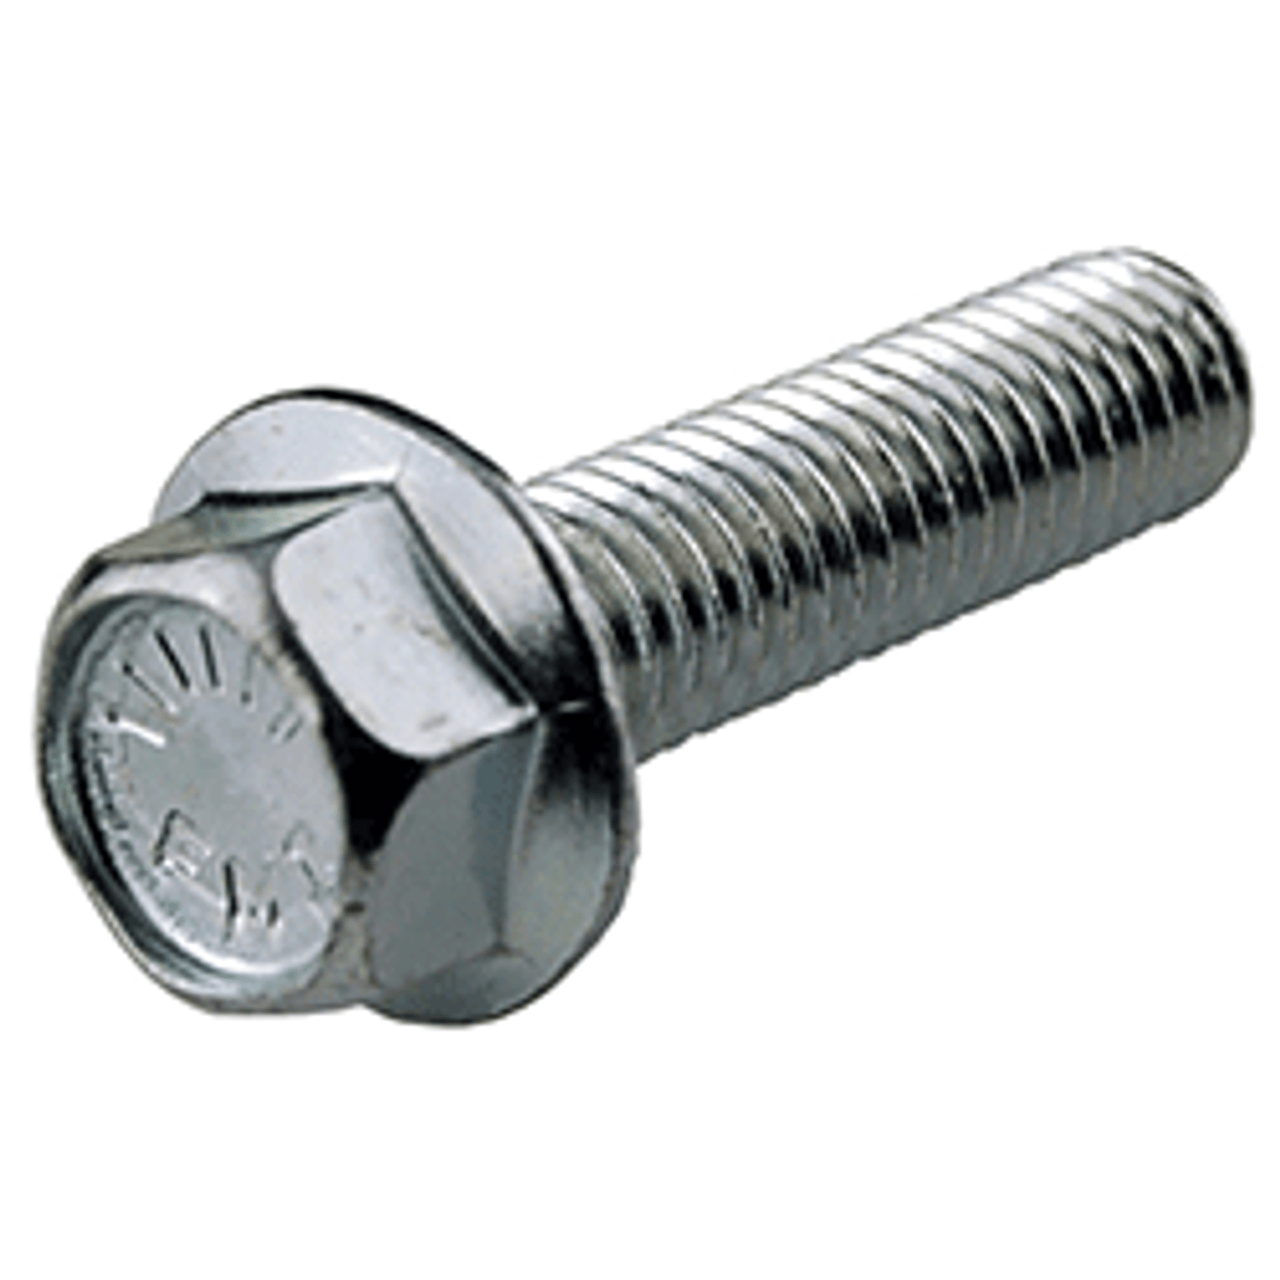 25 1/4-20x1/2 STAINLESS STEEL Serrated Hex Flange Screws Flange Bolts 